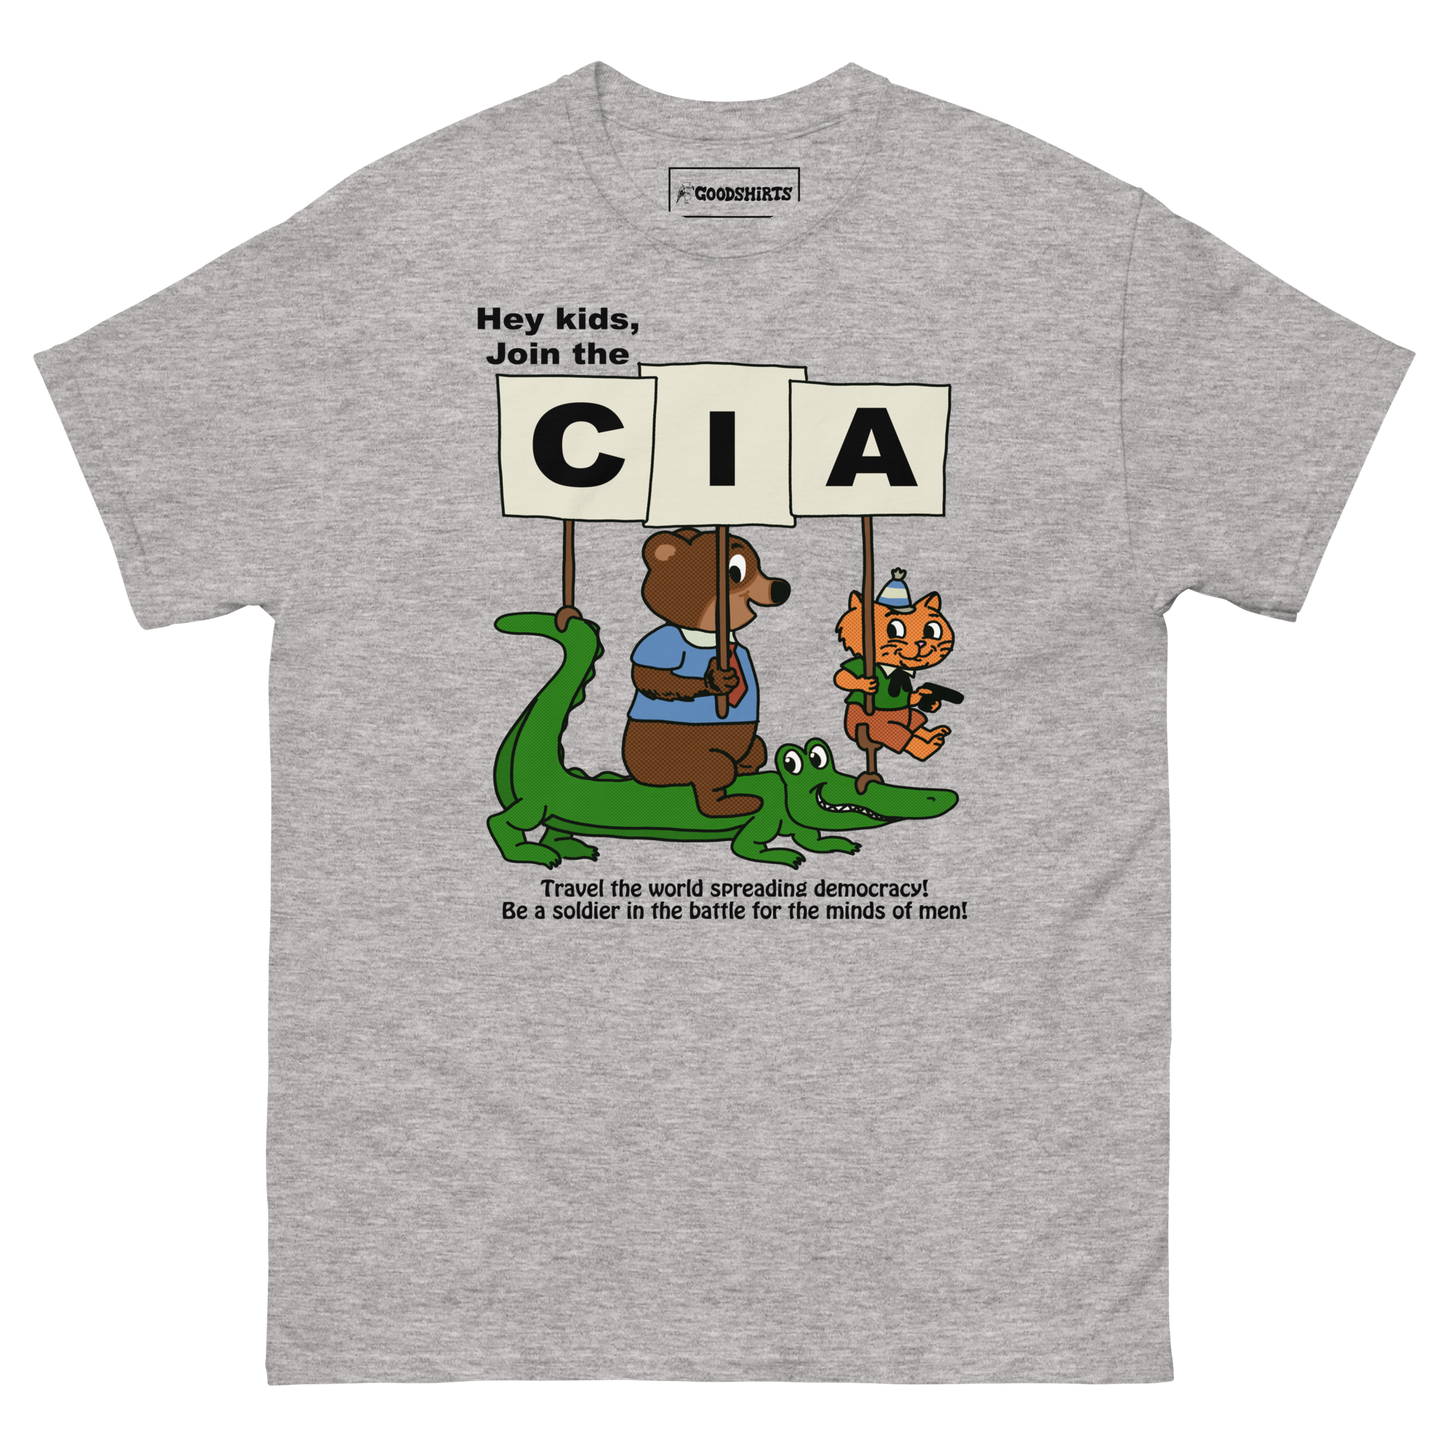 Hey Kids, Join The CIA.